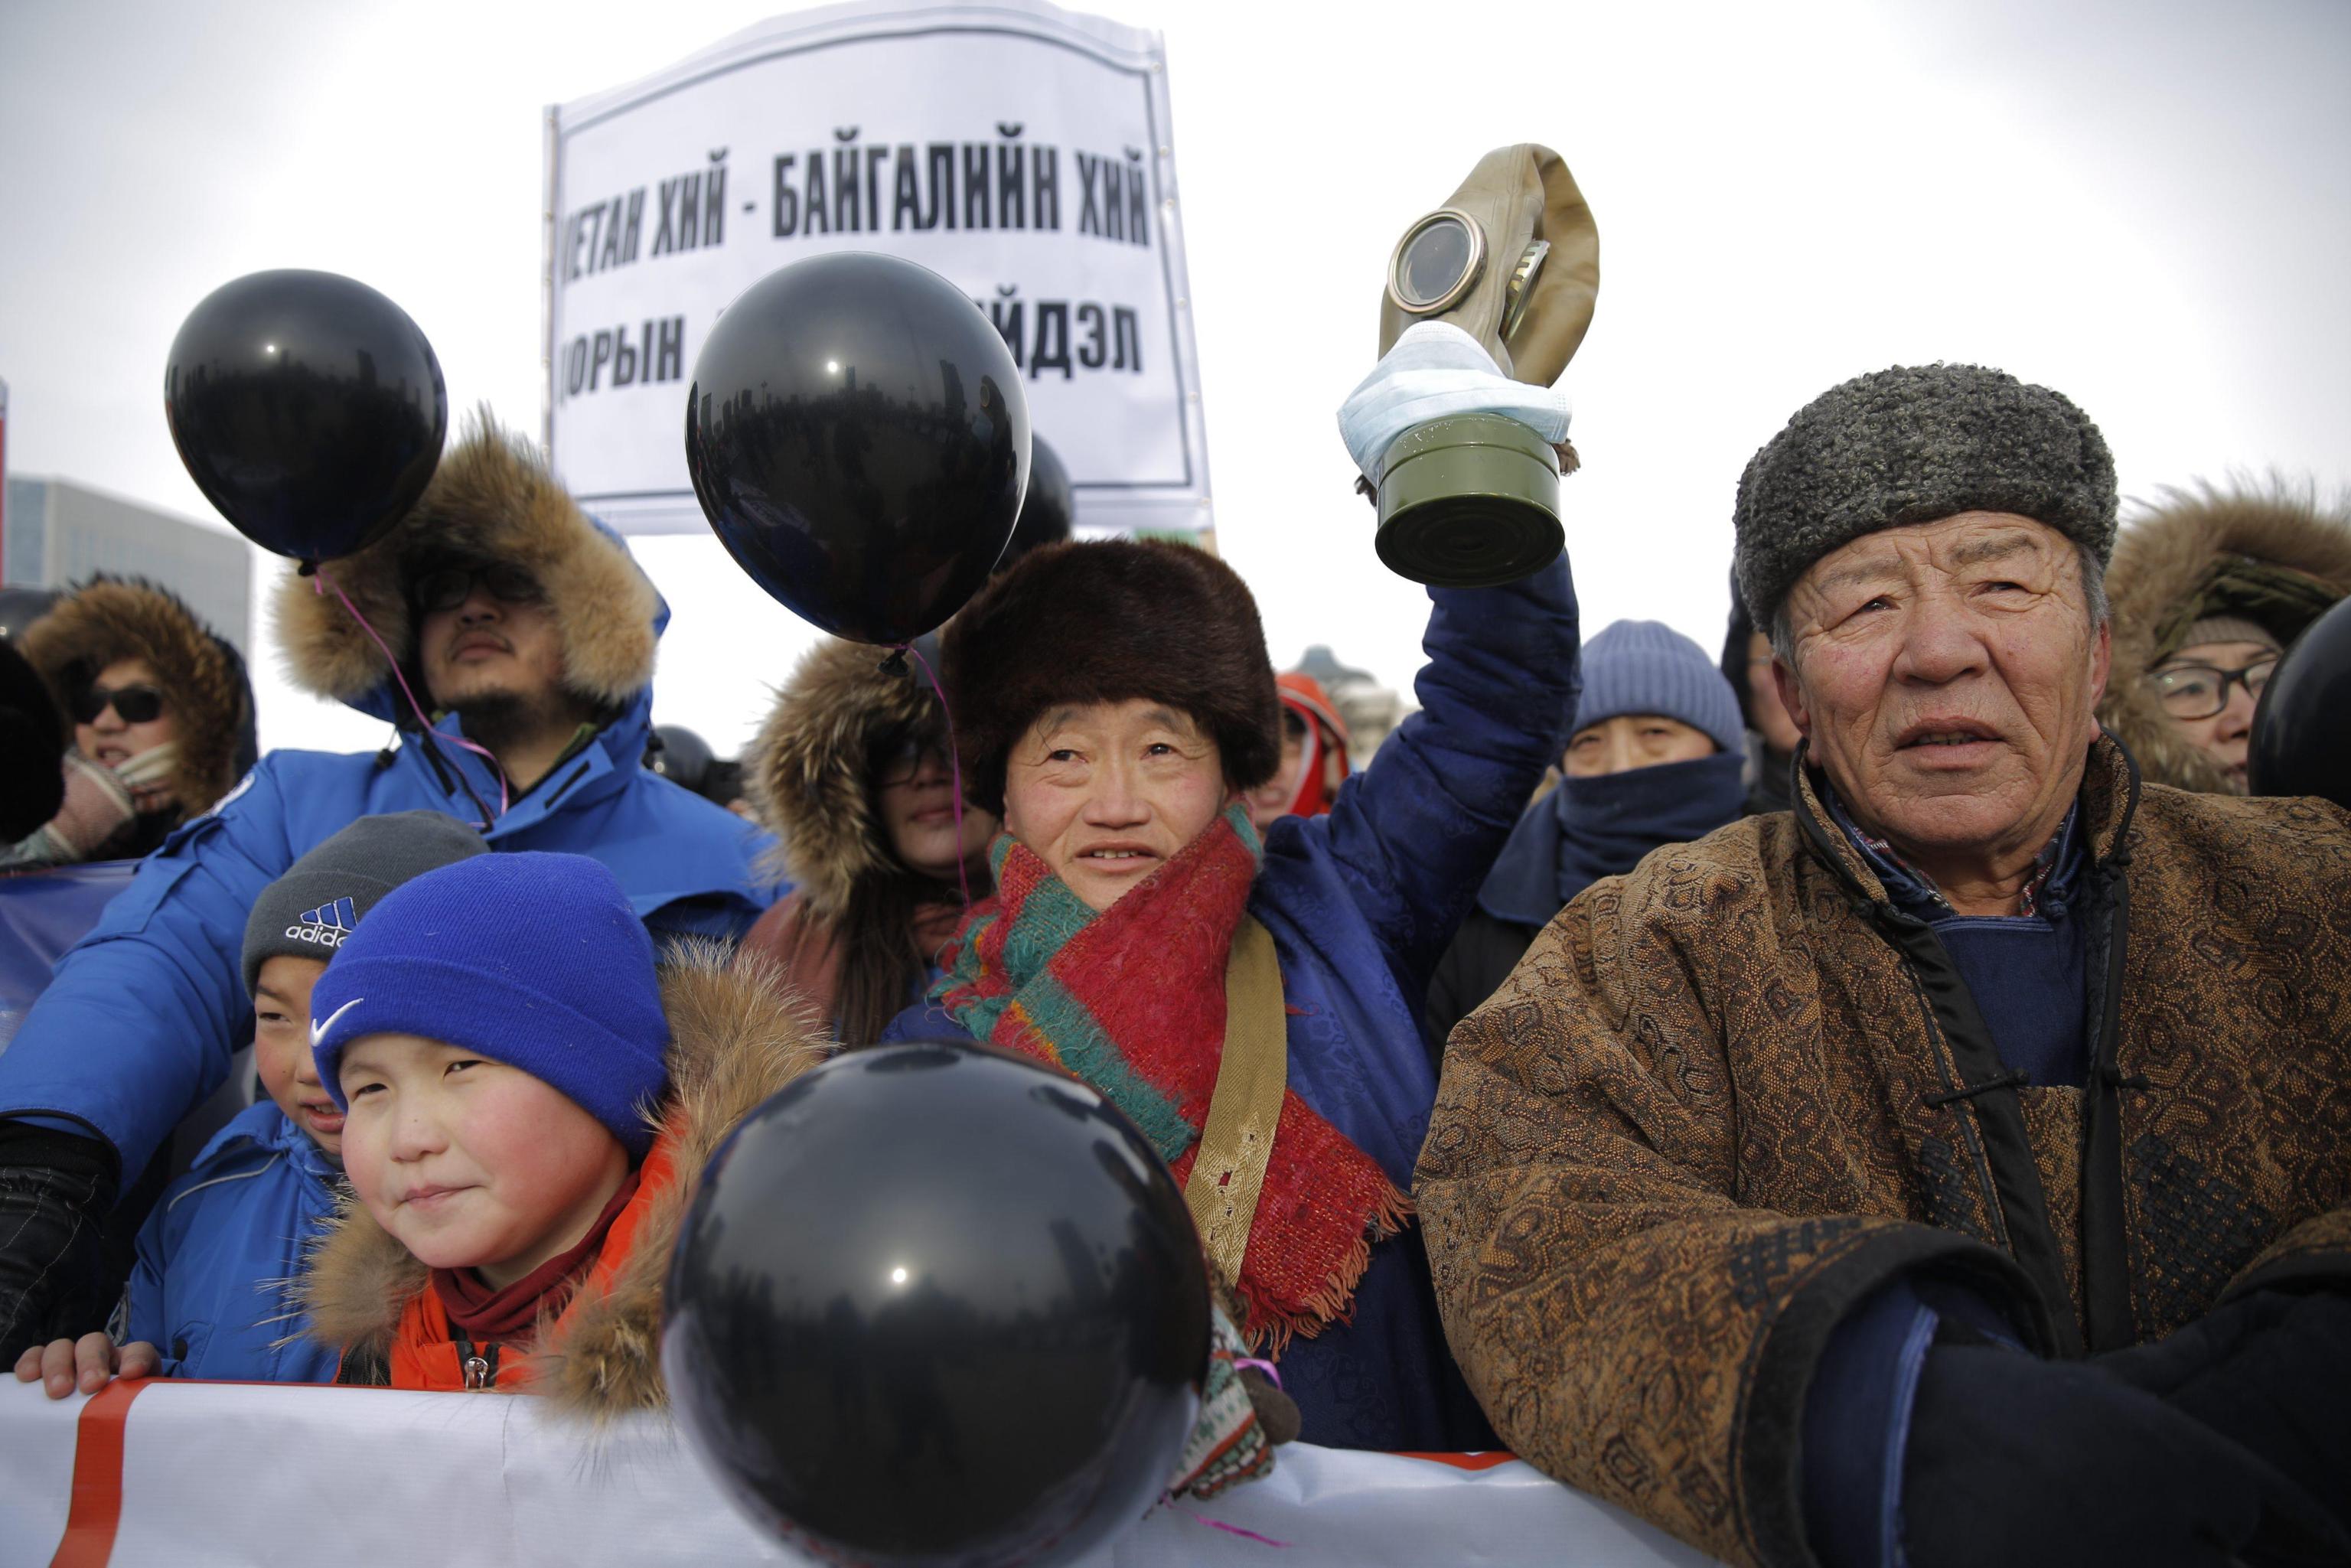 epa05756146 Mongolian protesters carry black balloons and placards as they march to demand government action to stop heavy air pollution during a rally at the Sukhbaatar Square in Ulaanbaatar, Mongolia, 28 January 2017. About 5,000 protesters participated in the rally to demand major action from the government to combat heavy air pollution plaguing the country's capital.  EPA/DAVAANYAM DELGERJARGAL